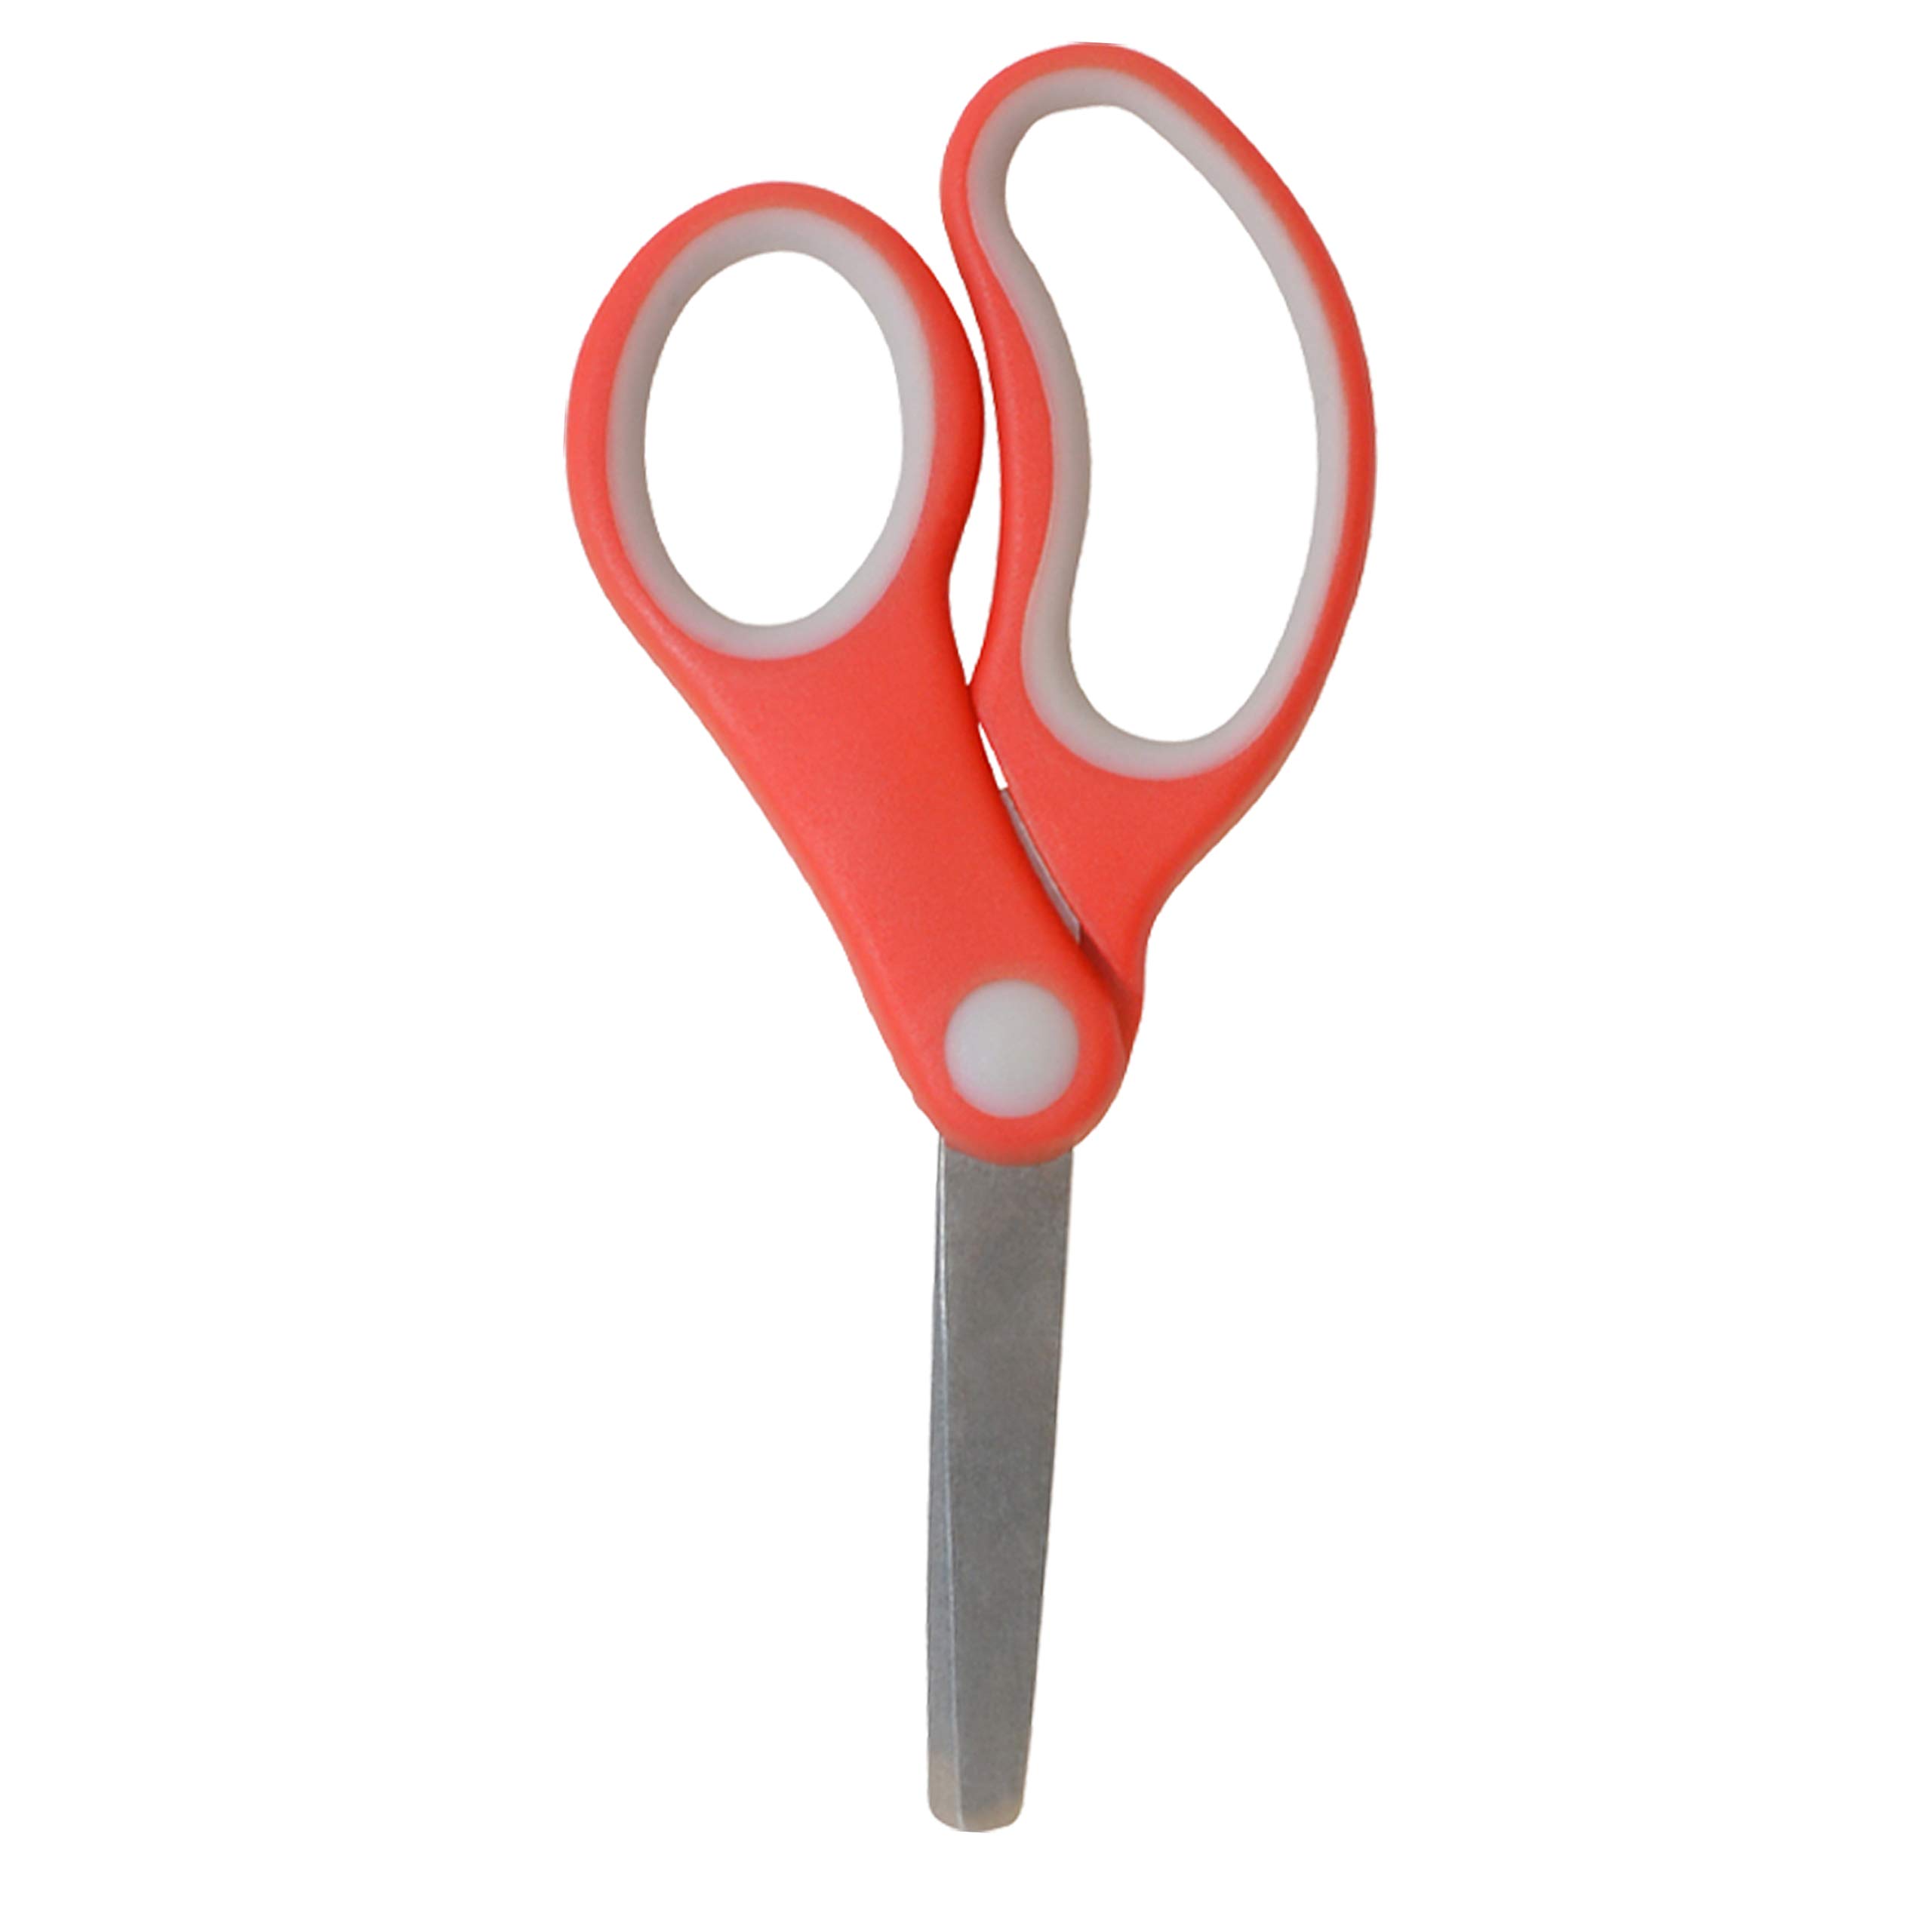 Westcott 55845 Right- and Left-Handed Scissors, Kids' Scissors, Ages 4-8, 5-Inch Blunt Tip, 30 Pack